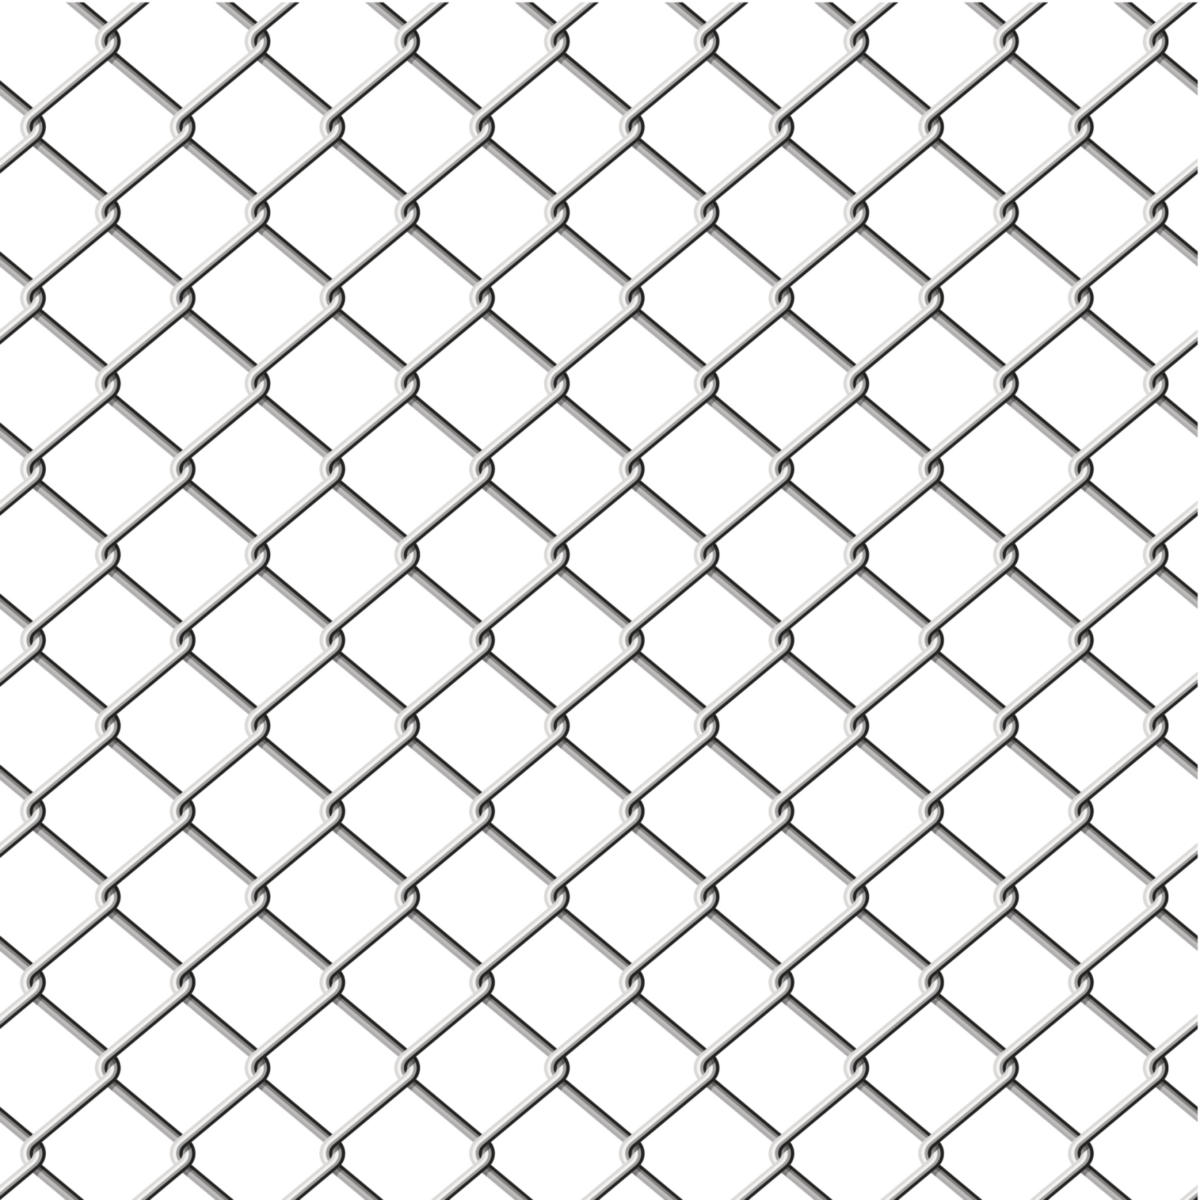 Chain link fence for security